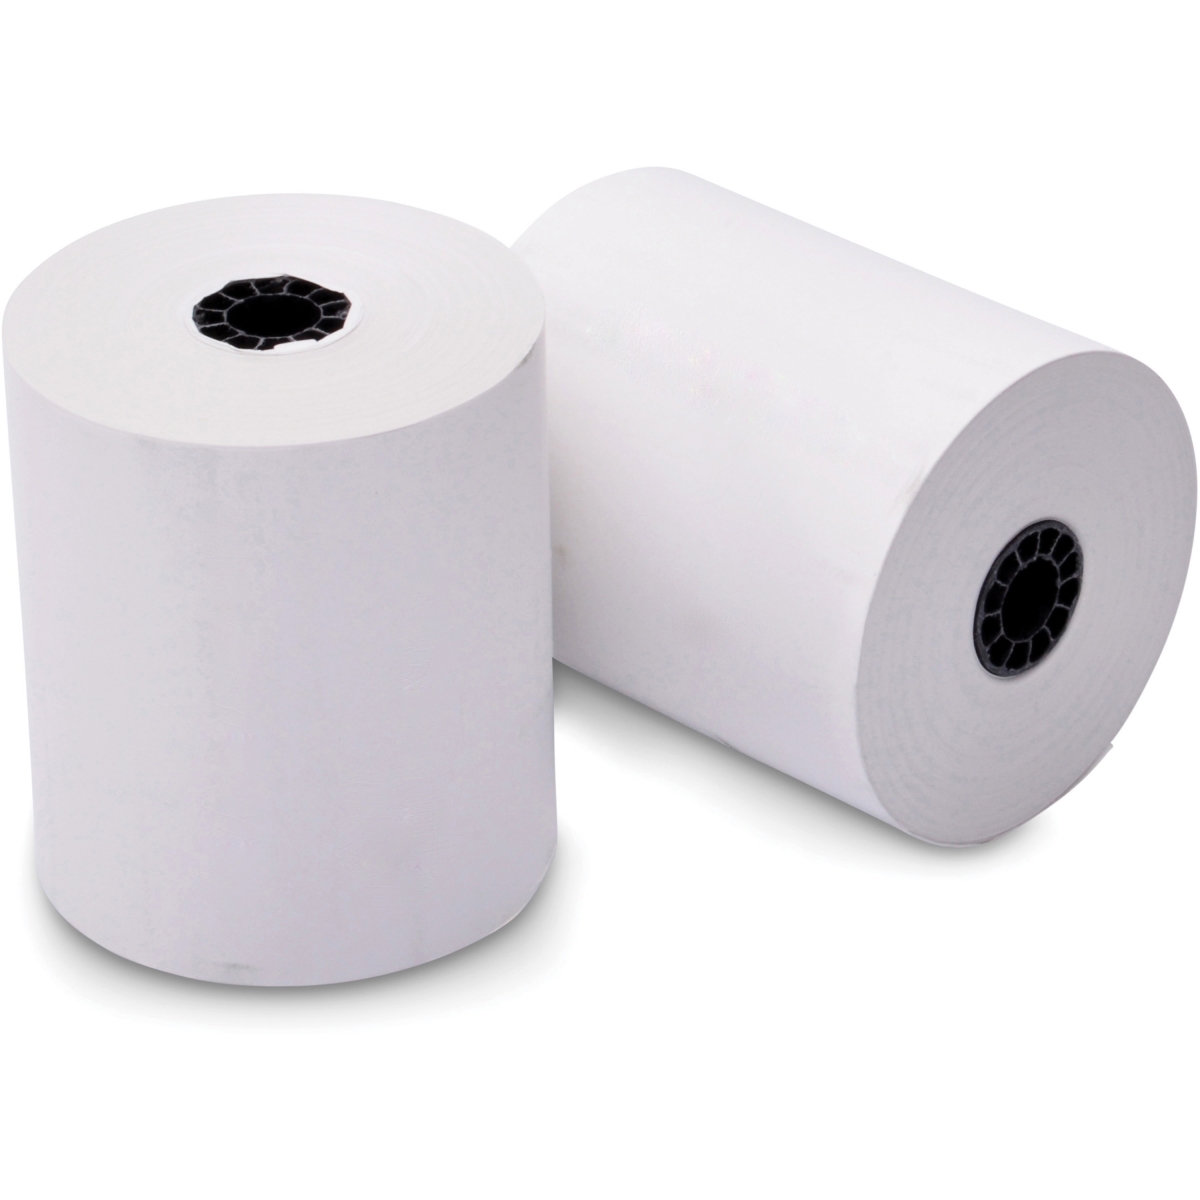 Iconex Icx90742242 3.25 In. X 243 Ft. 1 Ply Bond Paper Pos Receipt Roll, White - Pack Of 4